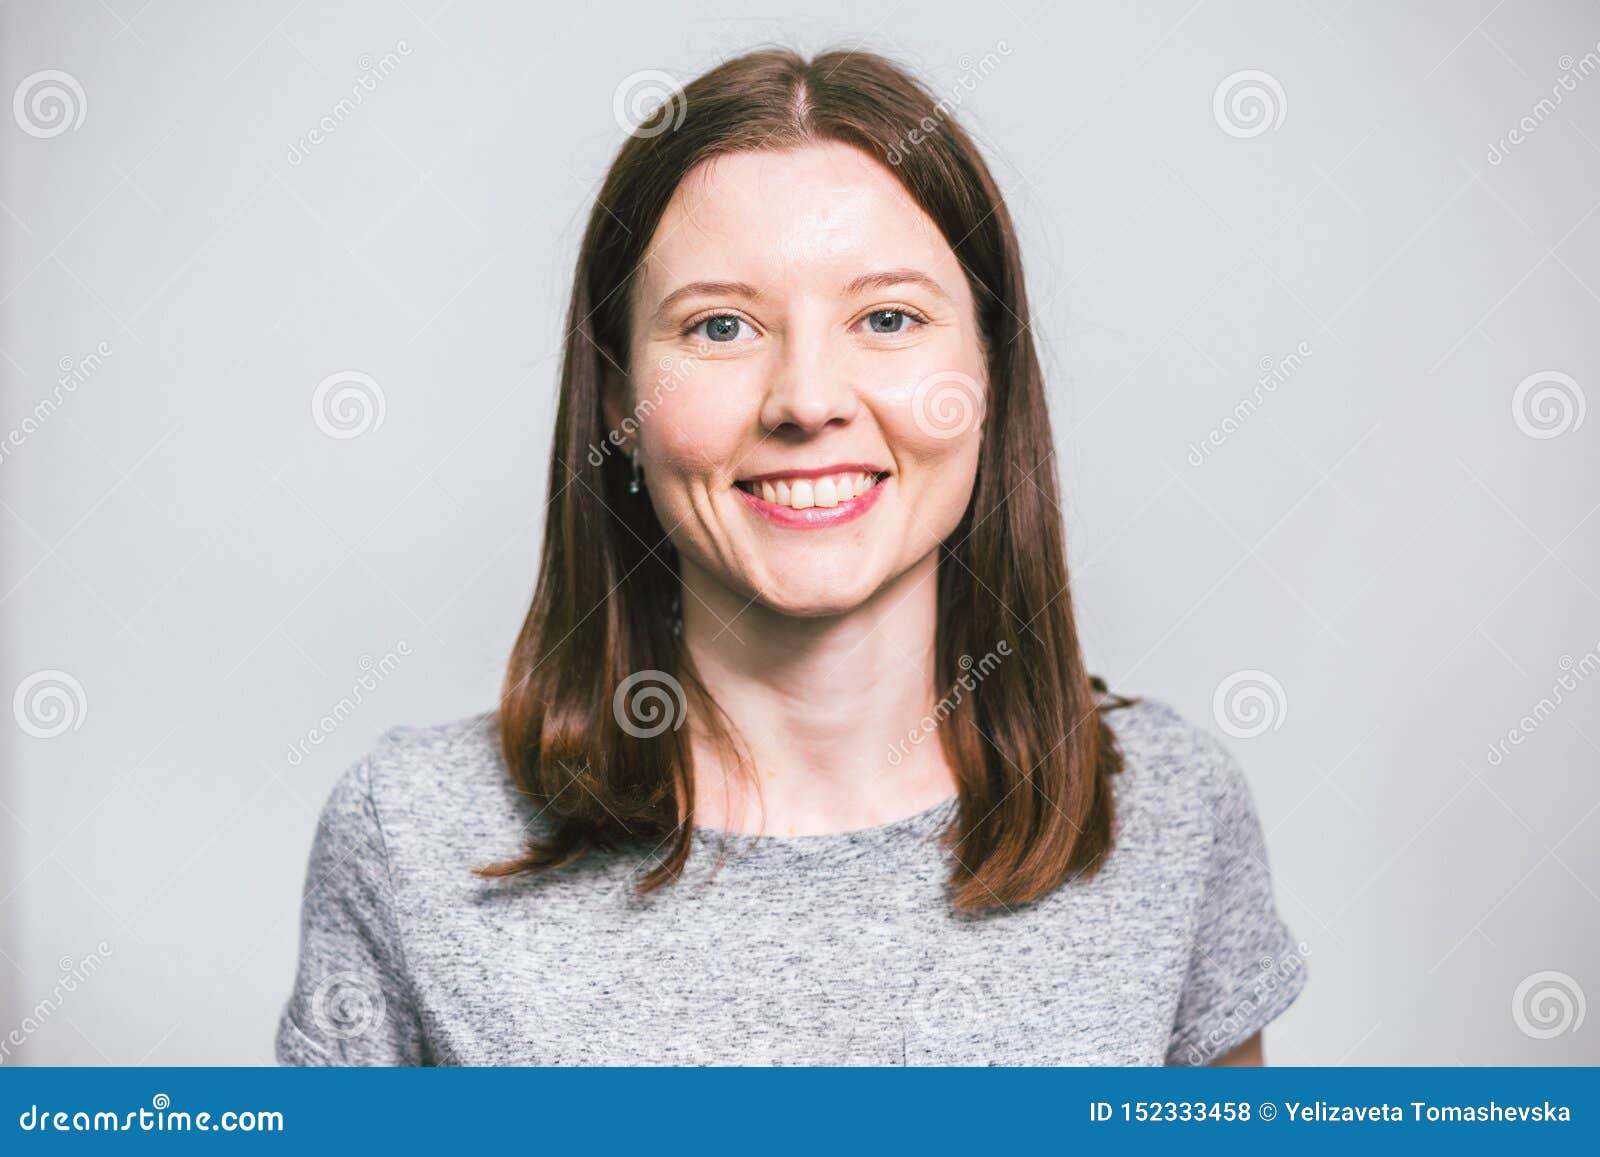 Portrait of Stylish Young Pretty Caucasian Woman Smiling in Grey T ...